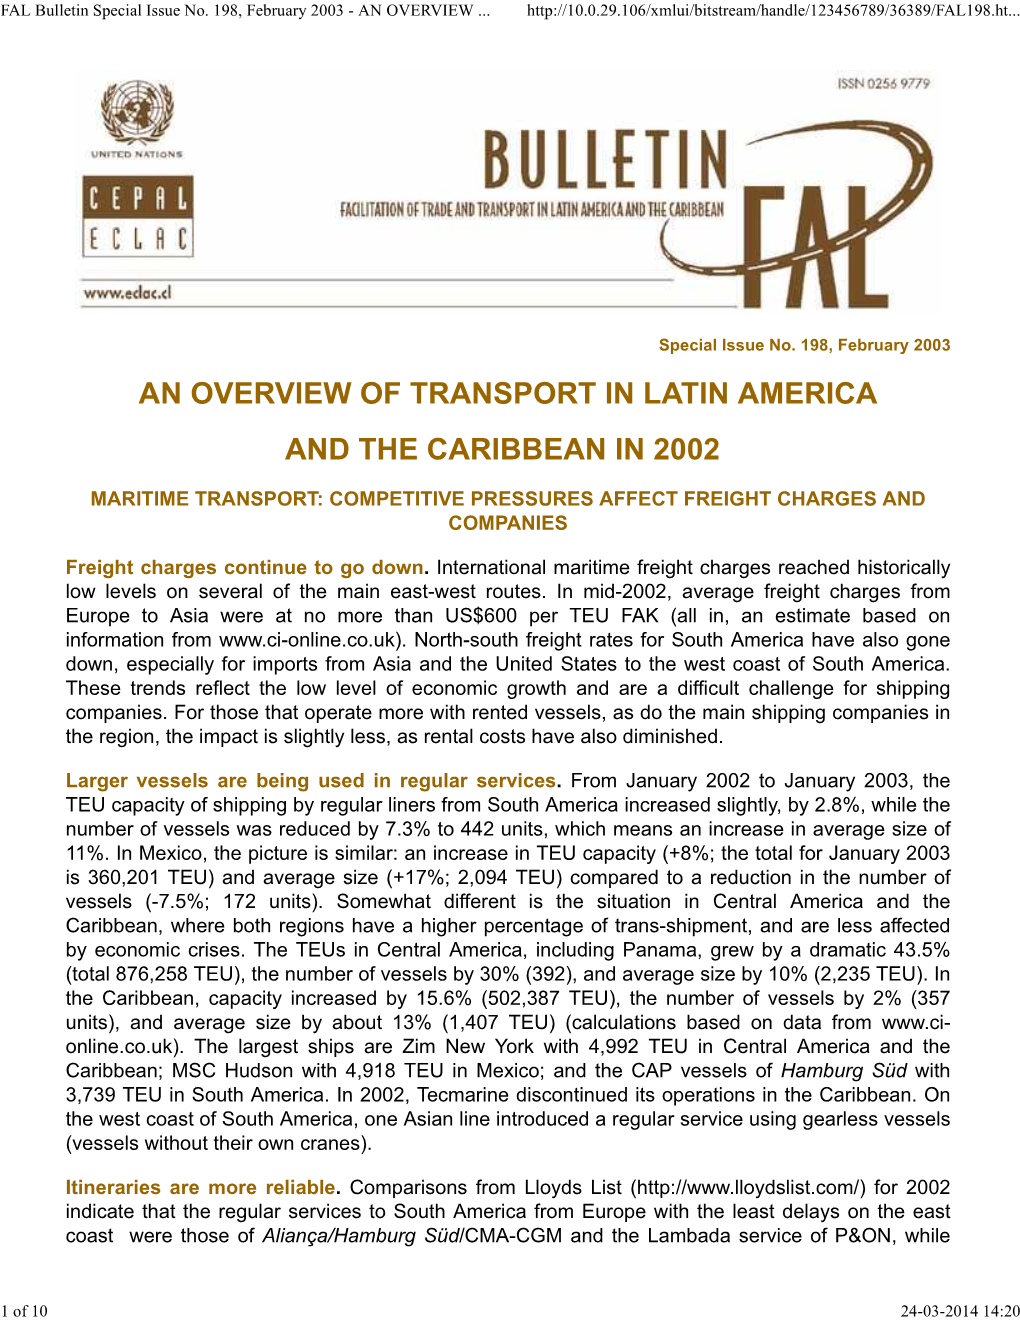 FAL Bulletin Special Issue No. 198, February 2003 - an OVERVIEW